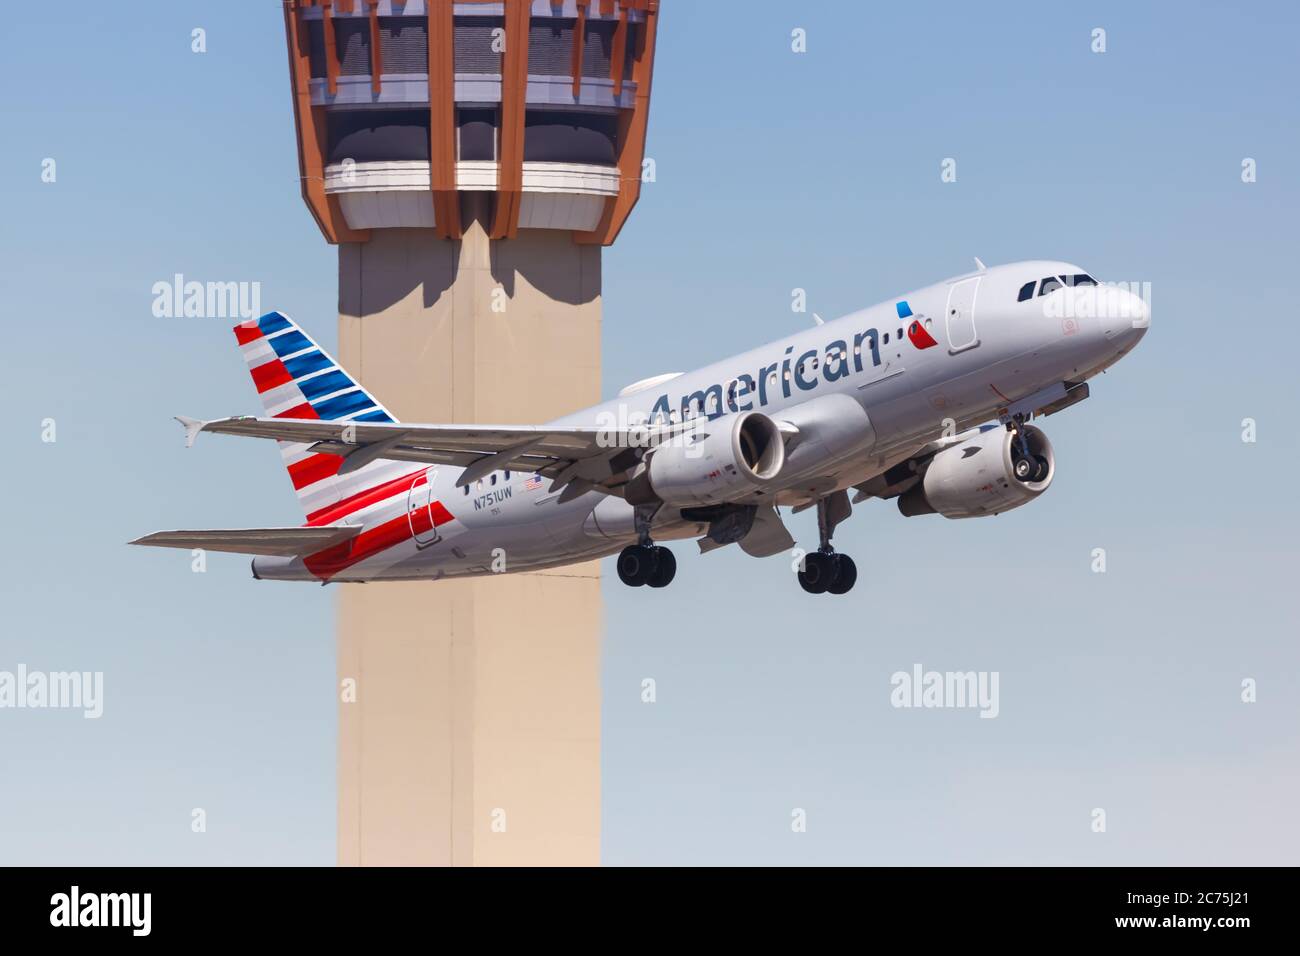 Phoenix, Arizona - April 8, 2019: American Airlines Airbus A319 airplane at Phoenix Sky Harbor airport (PHX) in Arizona. Airbus is a European aircraft Stock Photo